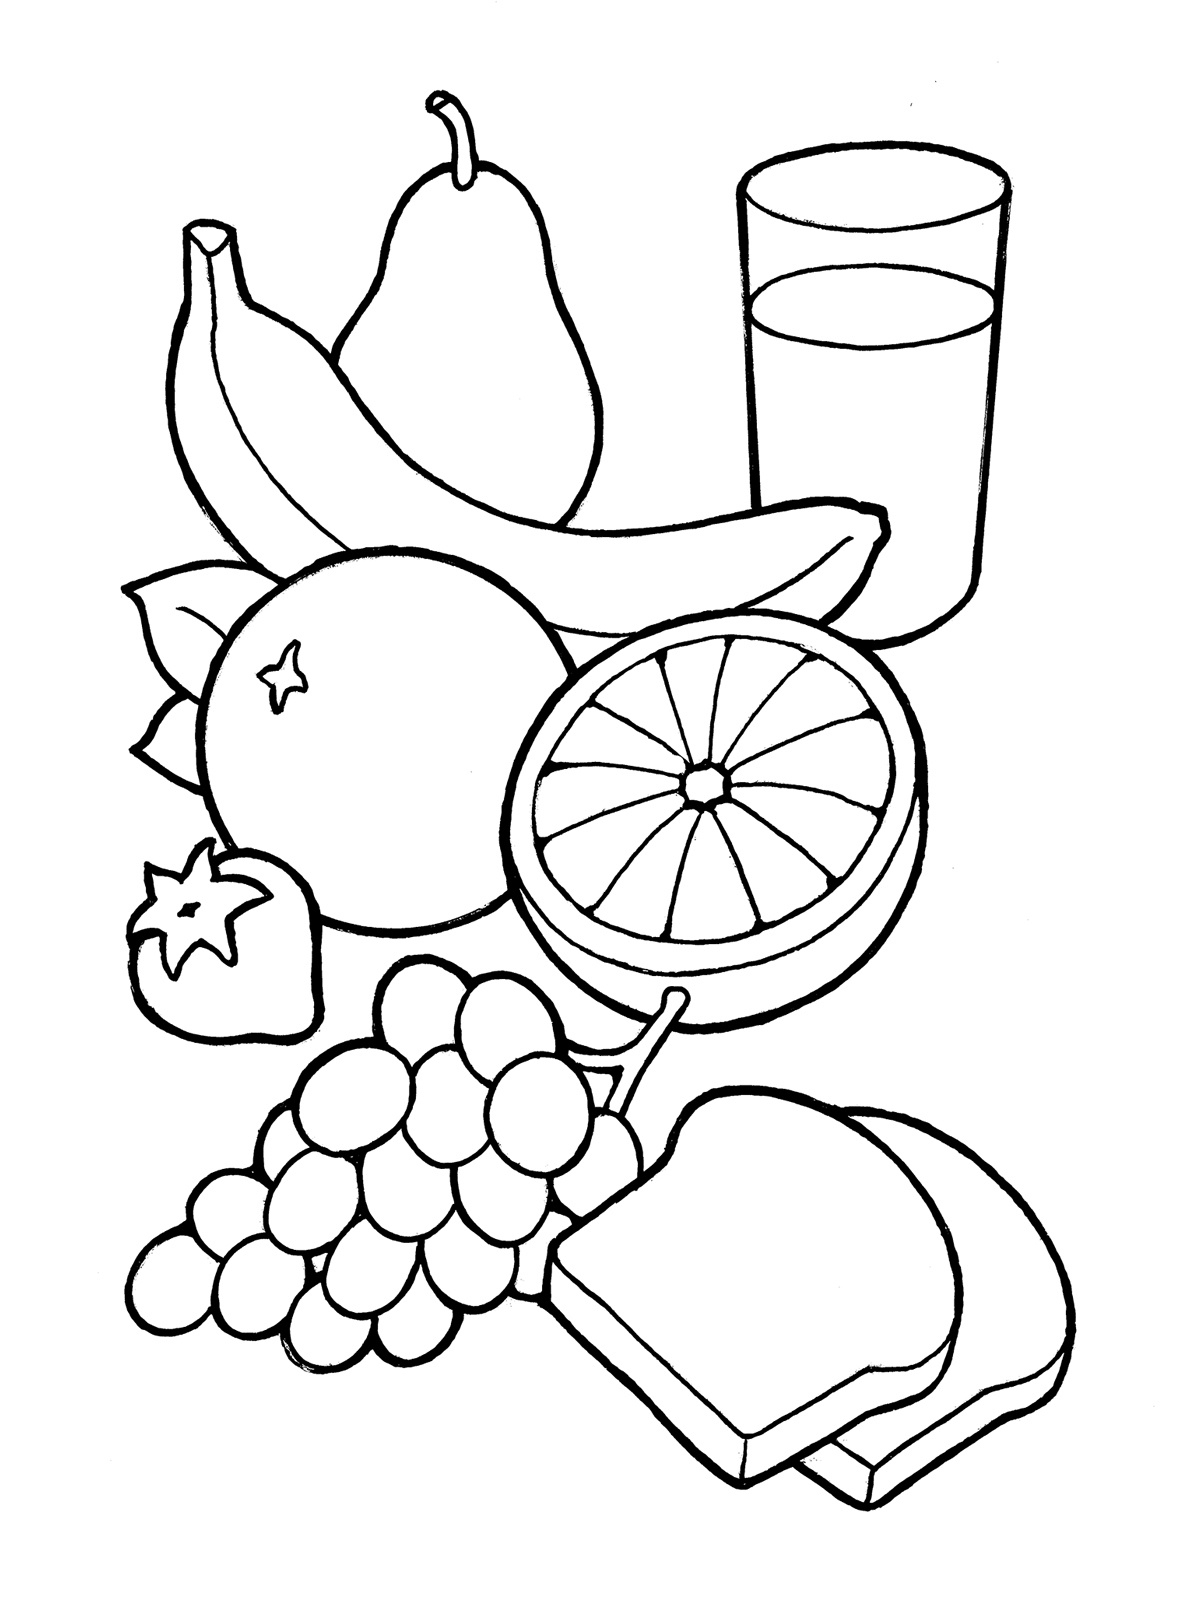 Healthy food clipart.